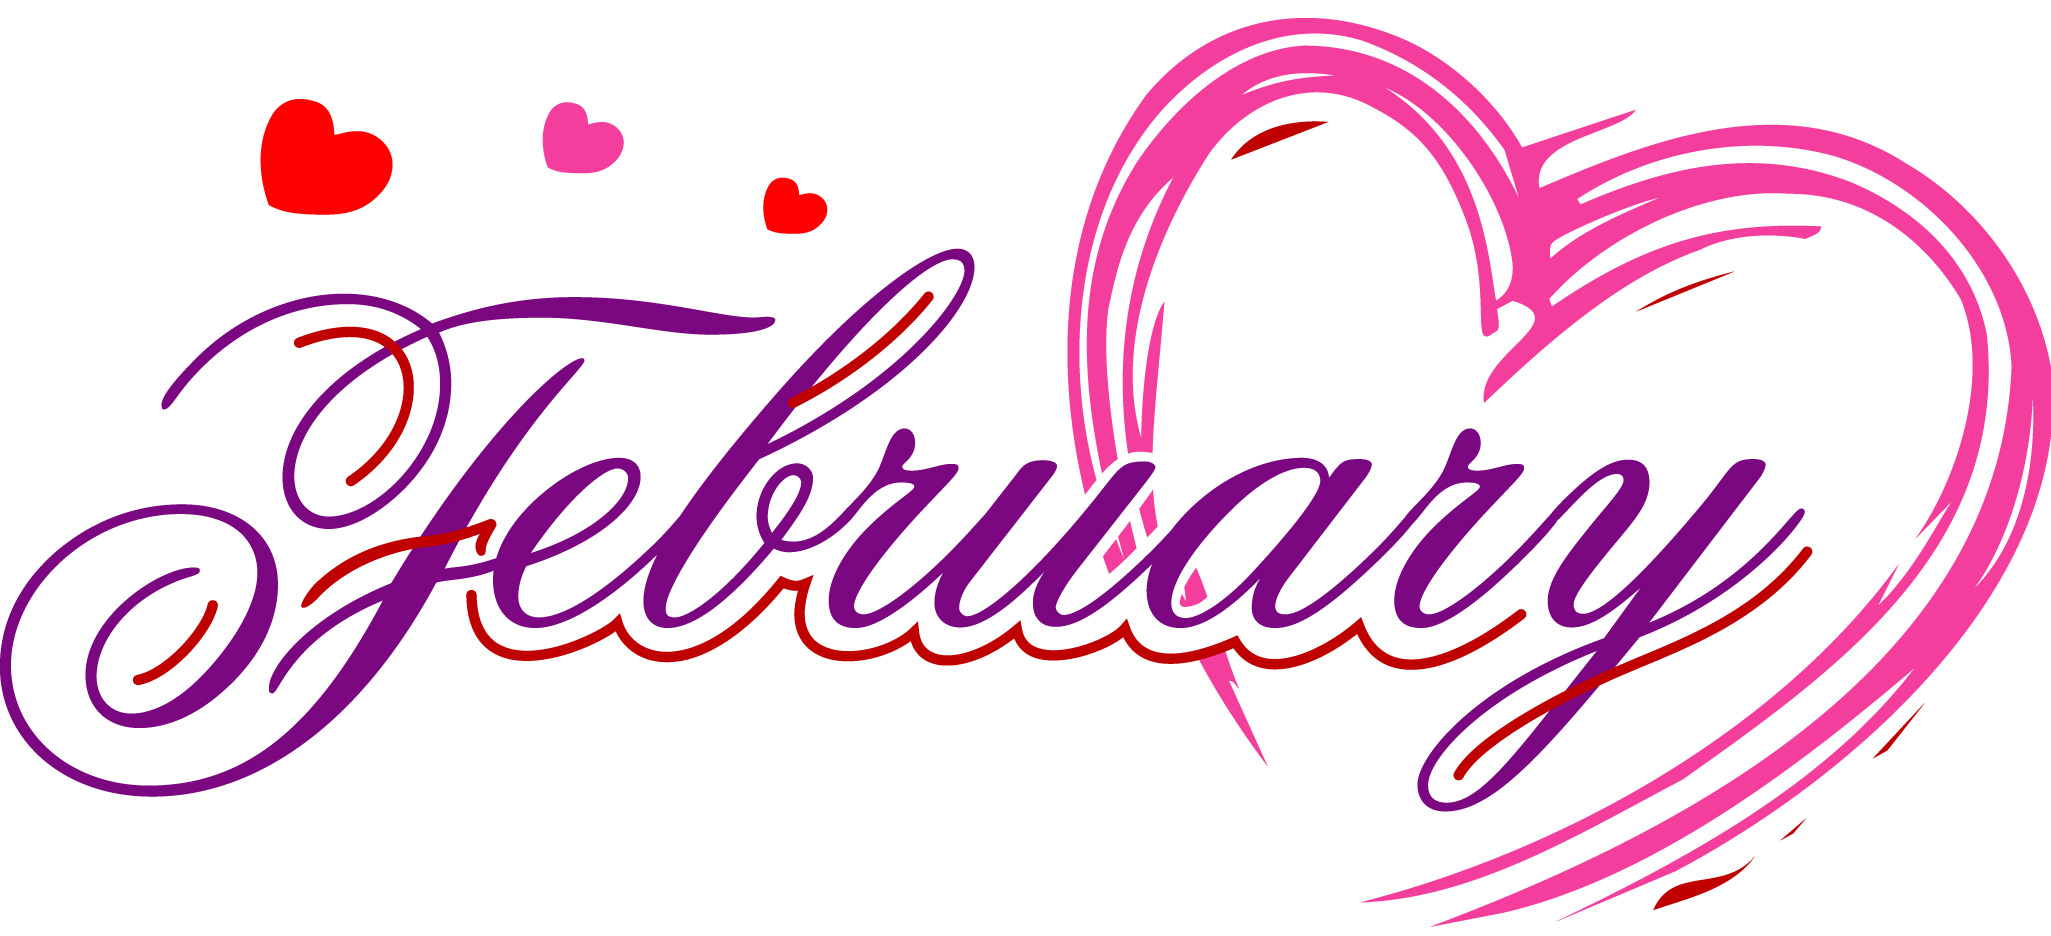 February clipart word, February word Transparent FREE for download on